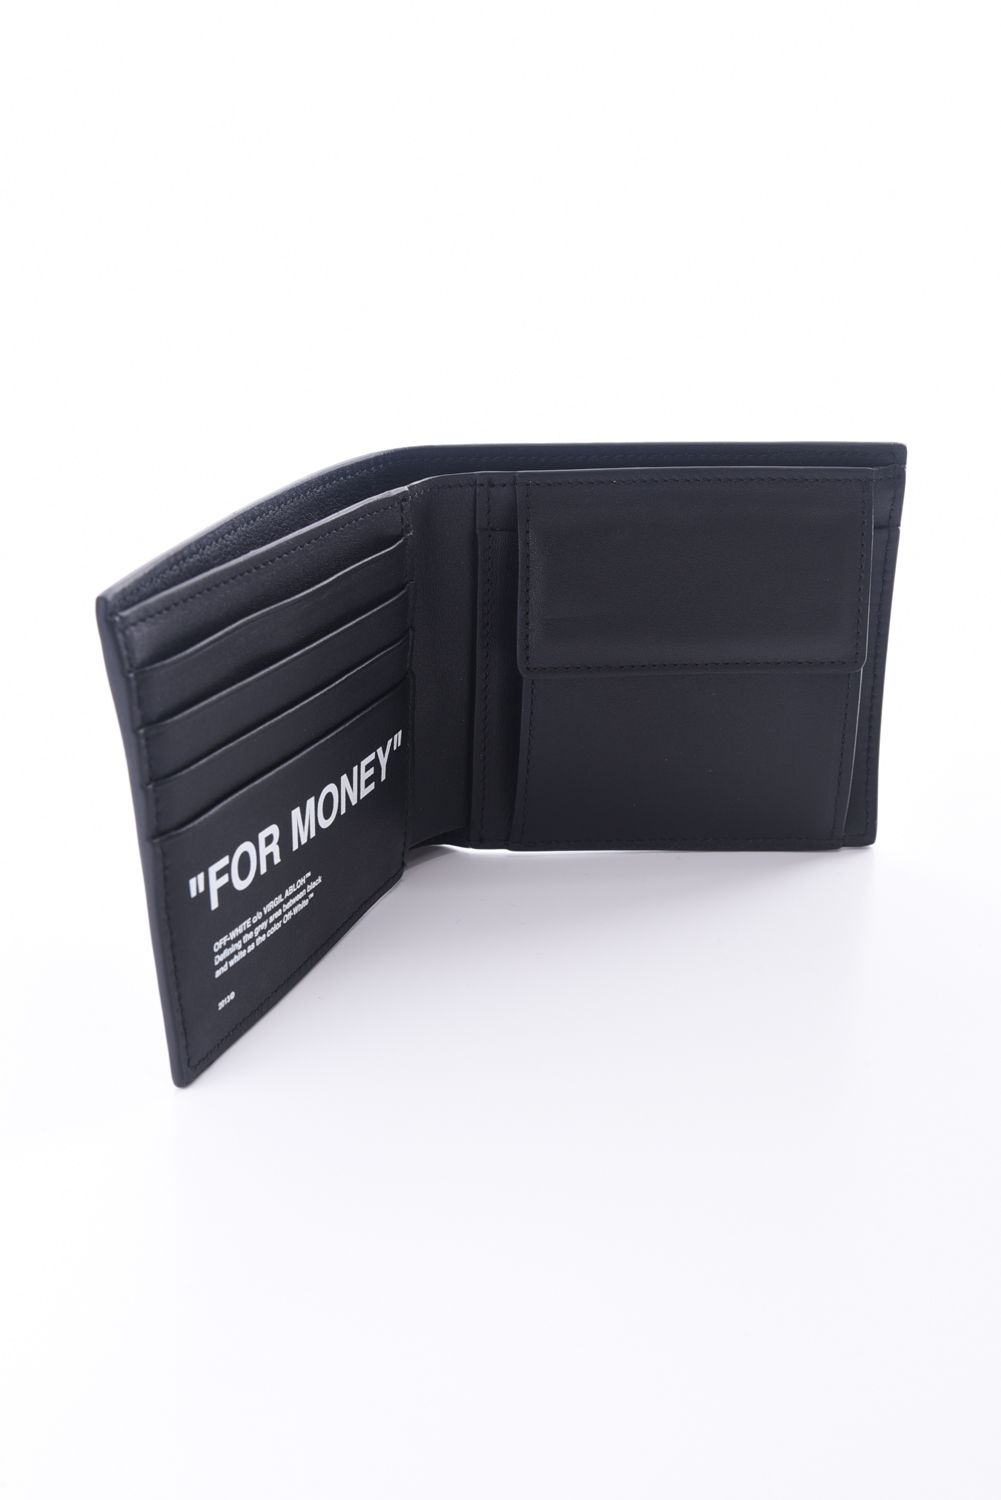 OFF-WHITE - FOR MONEY LEATHER WALLET / ロゴプリント レザー 二